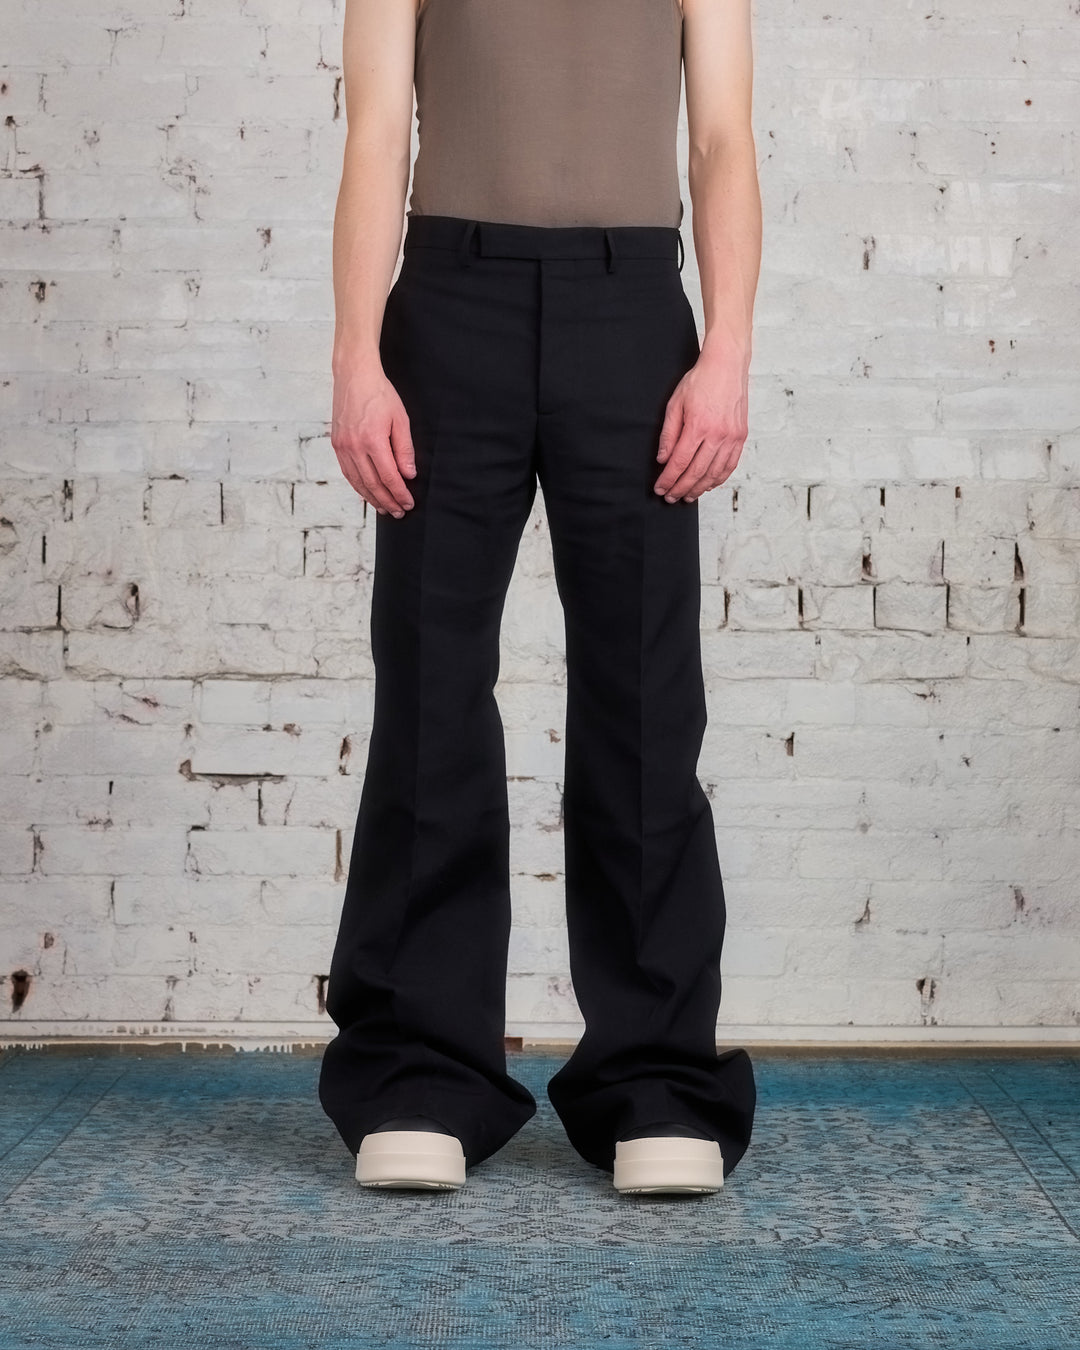 Rick Owens Runway Bonotto Wide Astaire Pant Twill Black